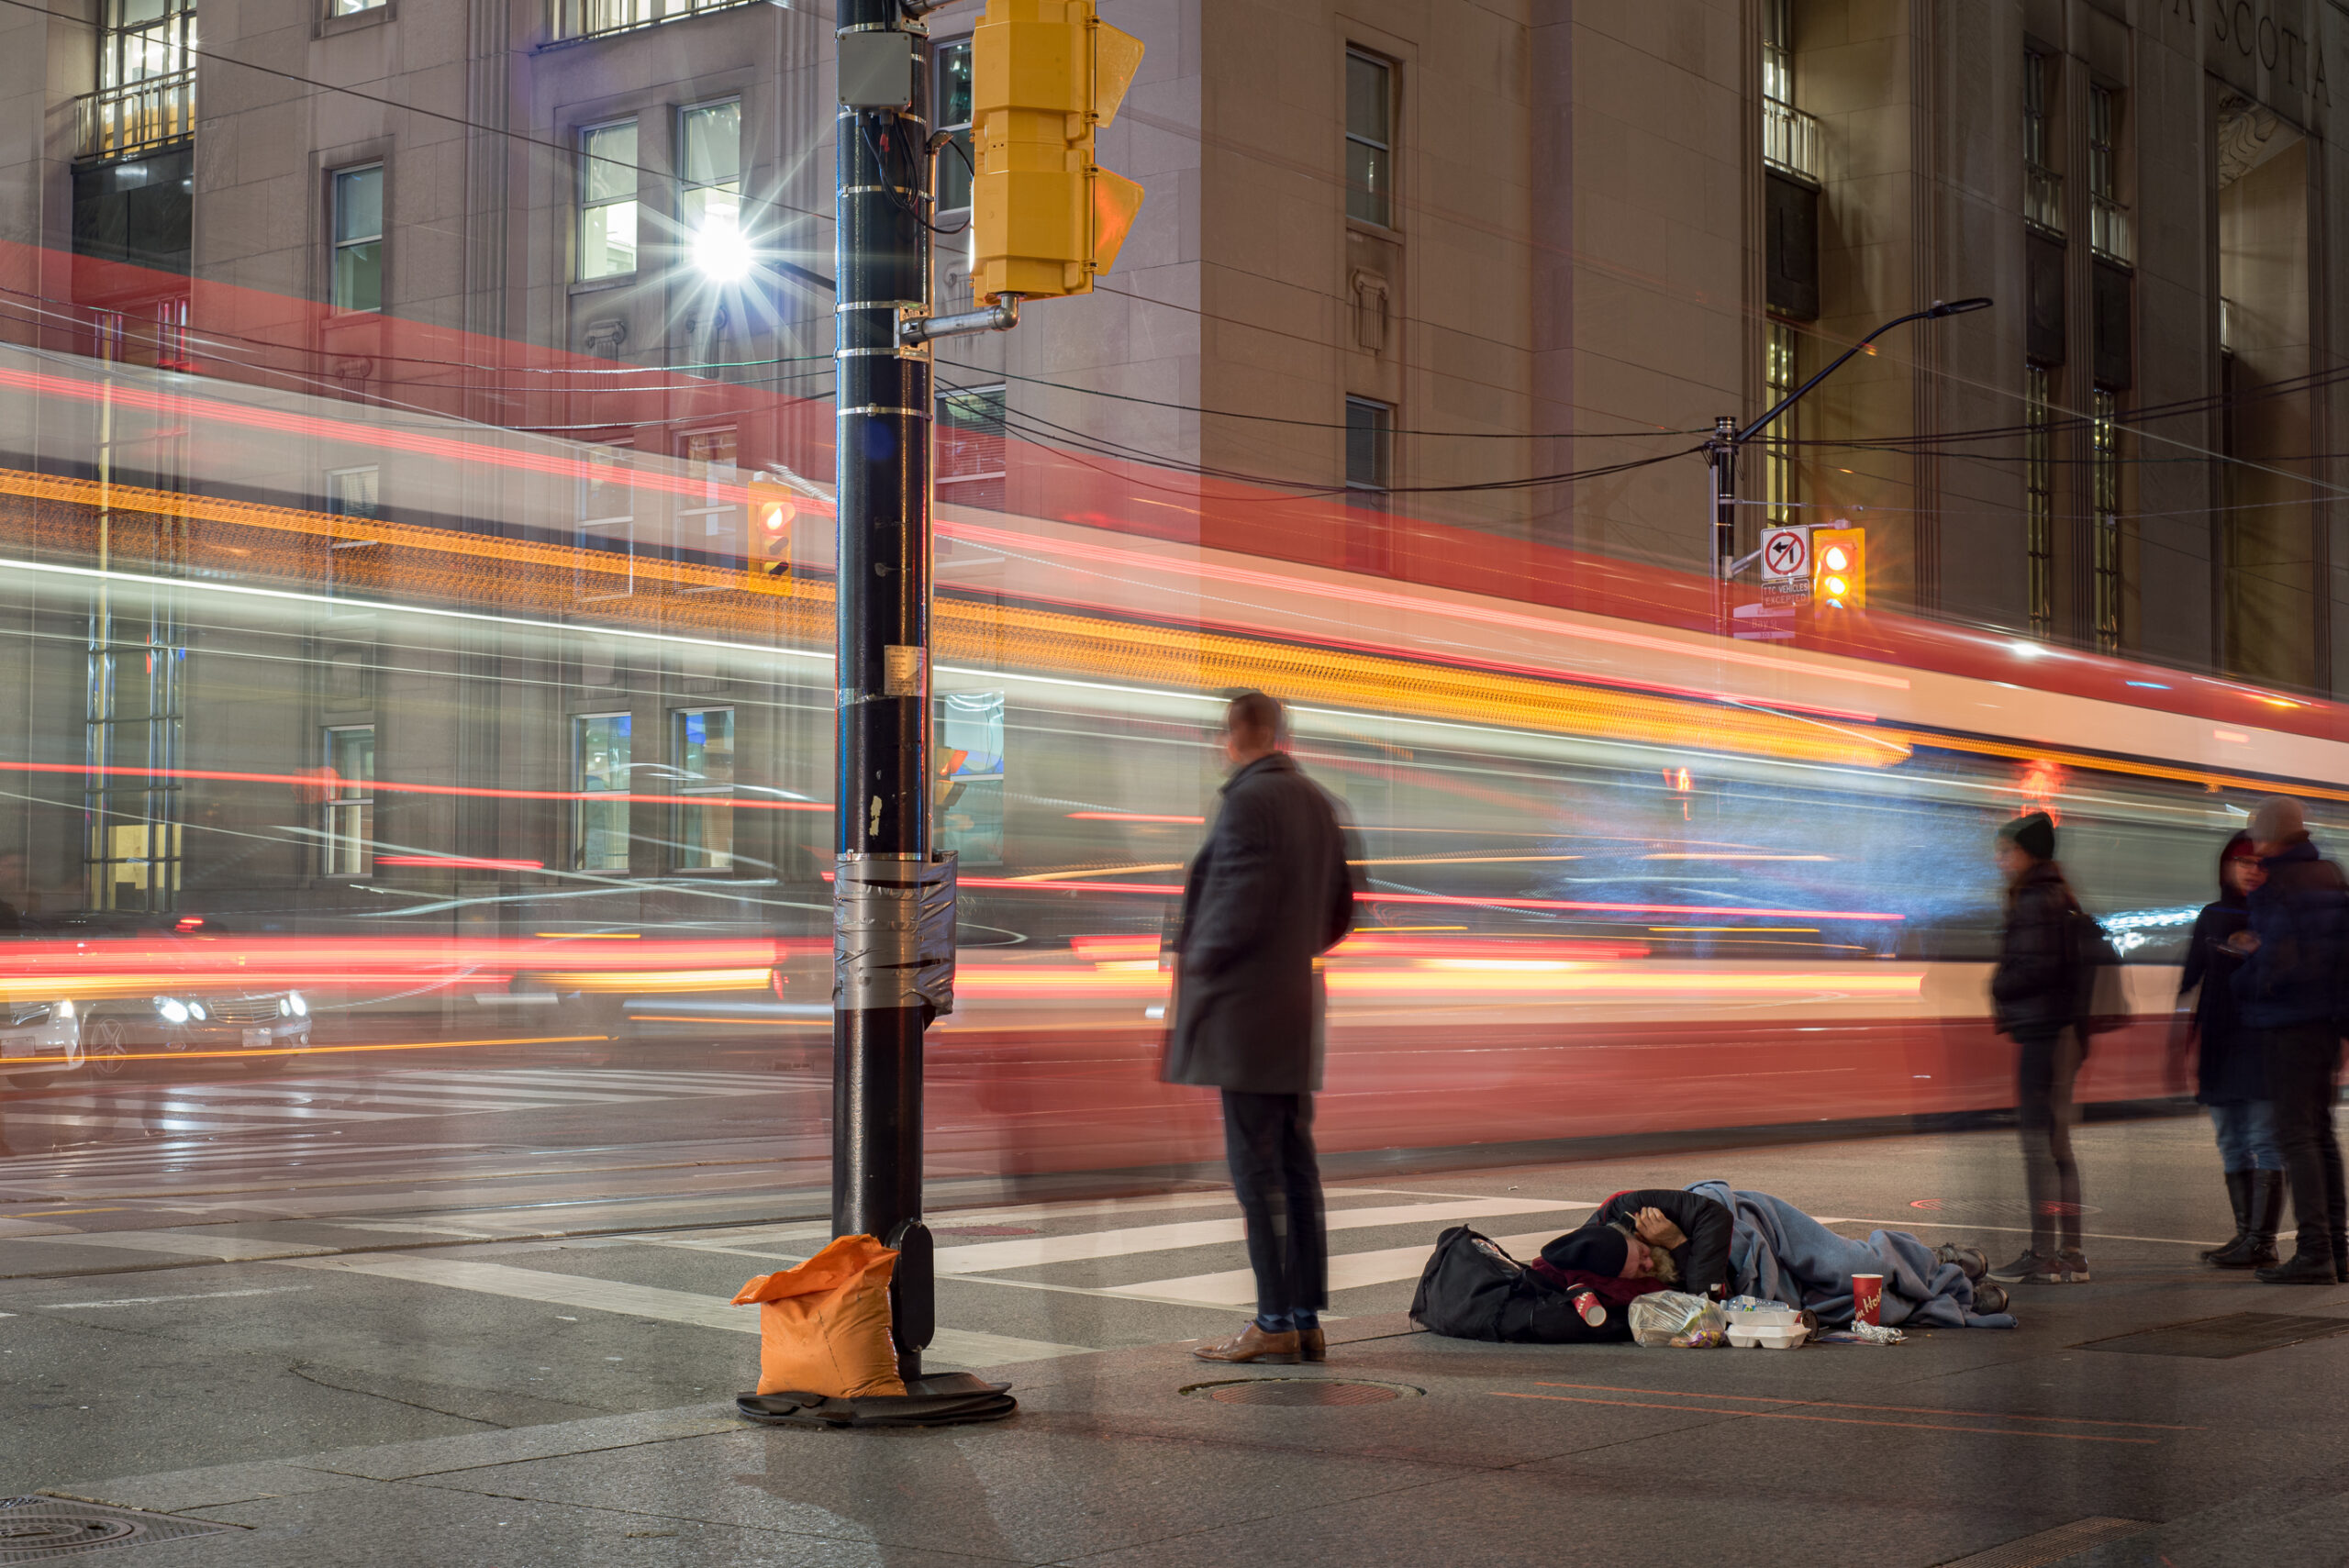 A homeless man lying on a Toronto street in a sleeping bag while a street care passes by.